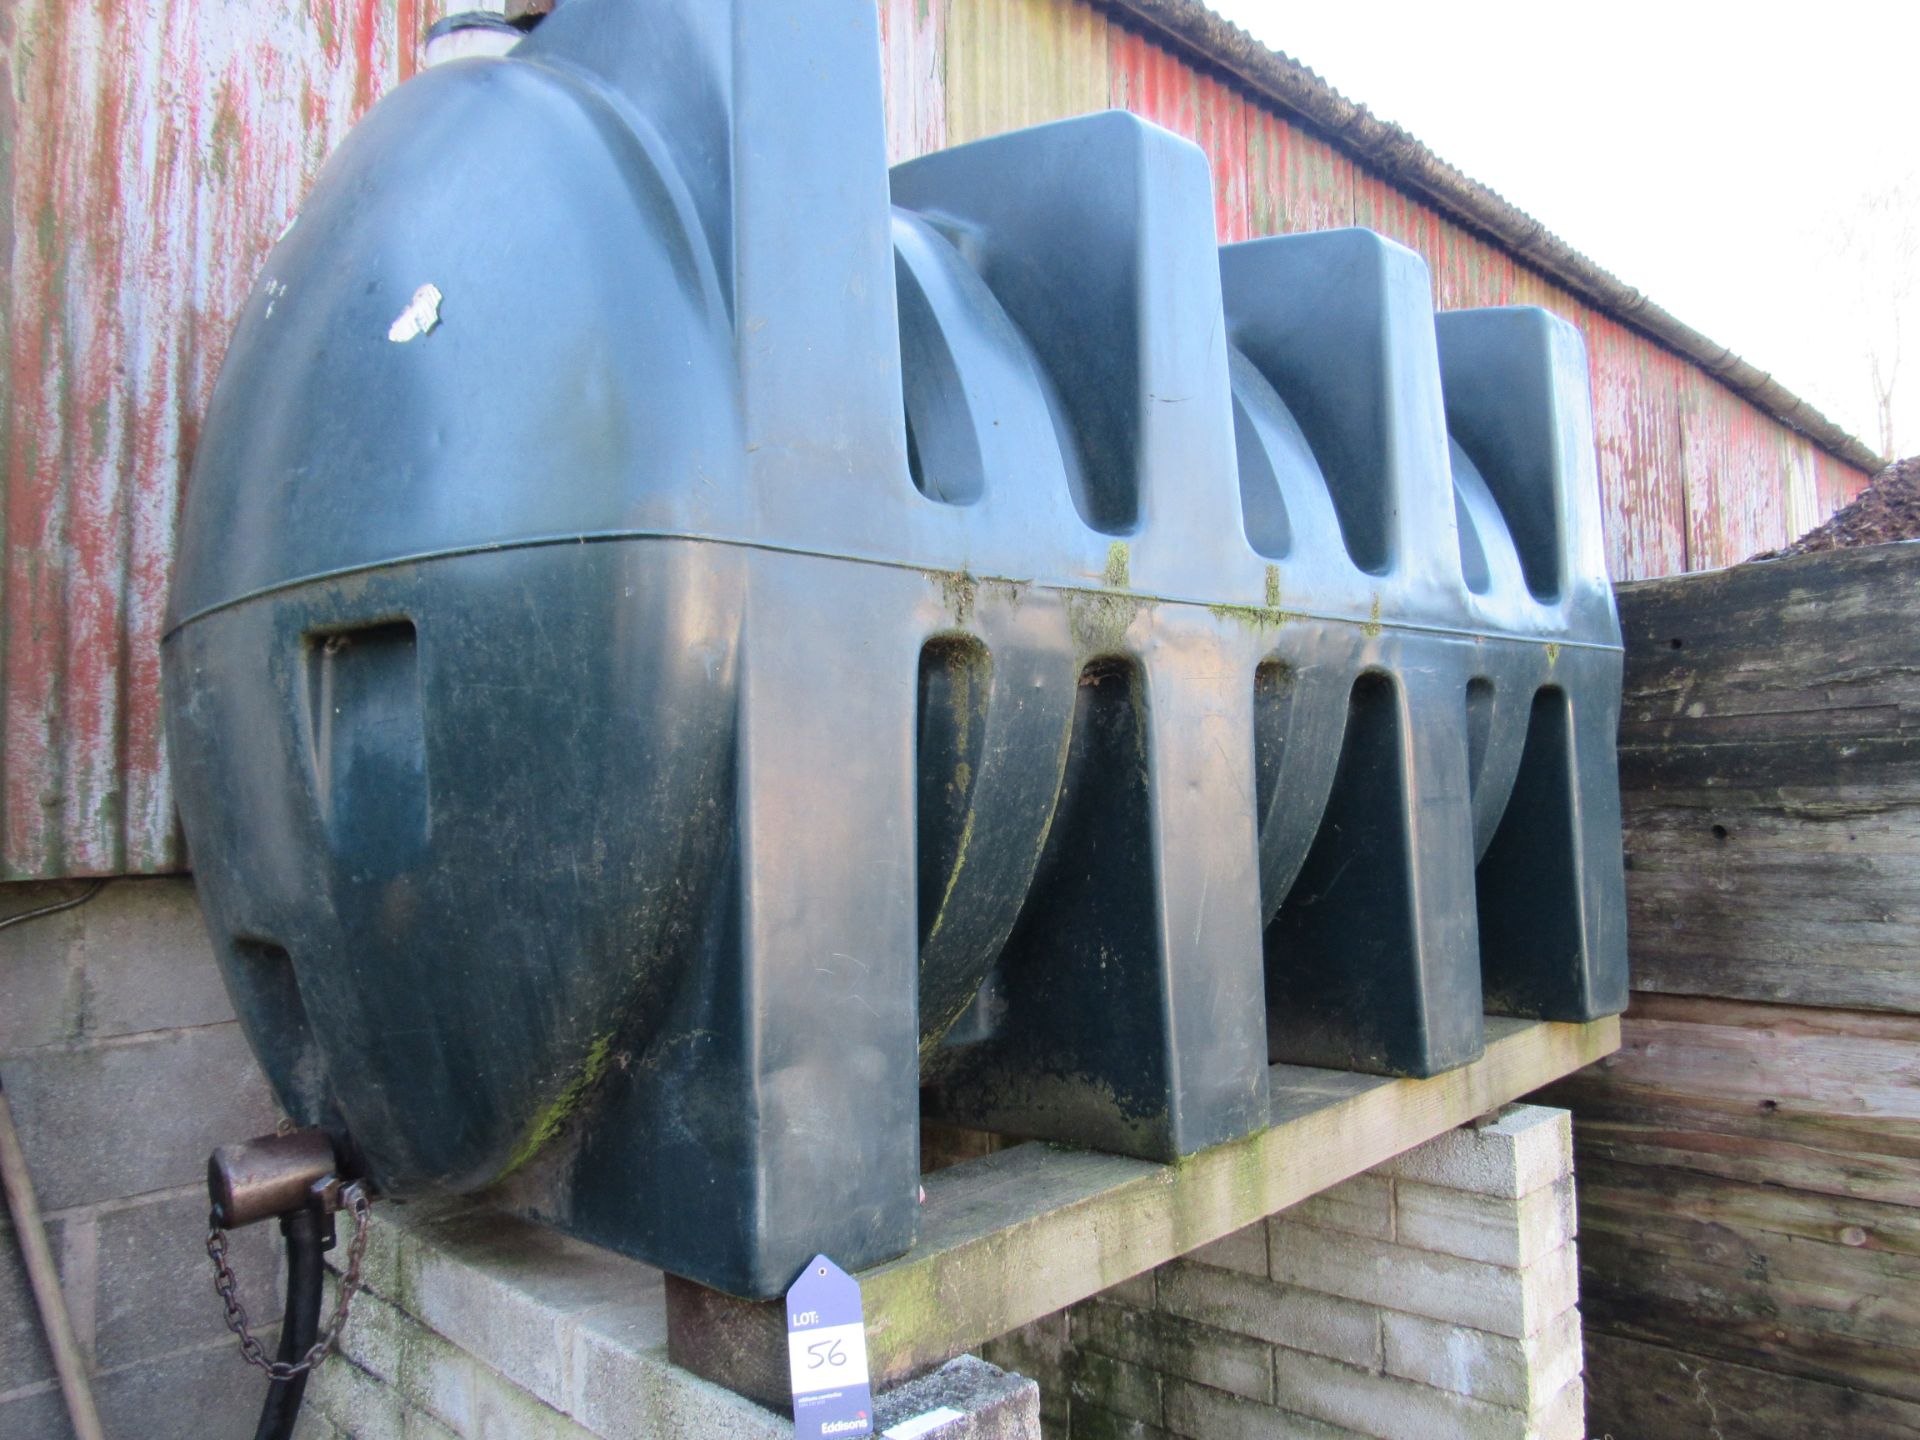 2000L diesel tank and remaining contents approx. 2 - Image 2 of 3